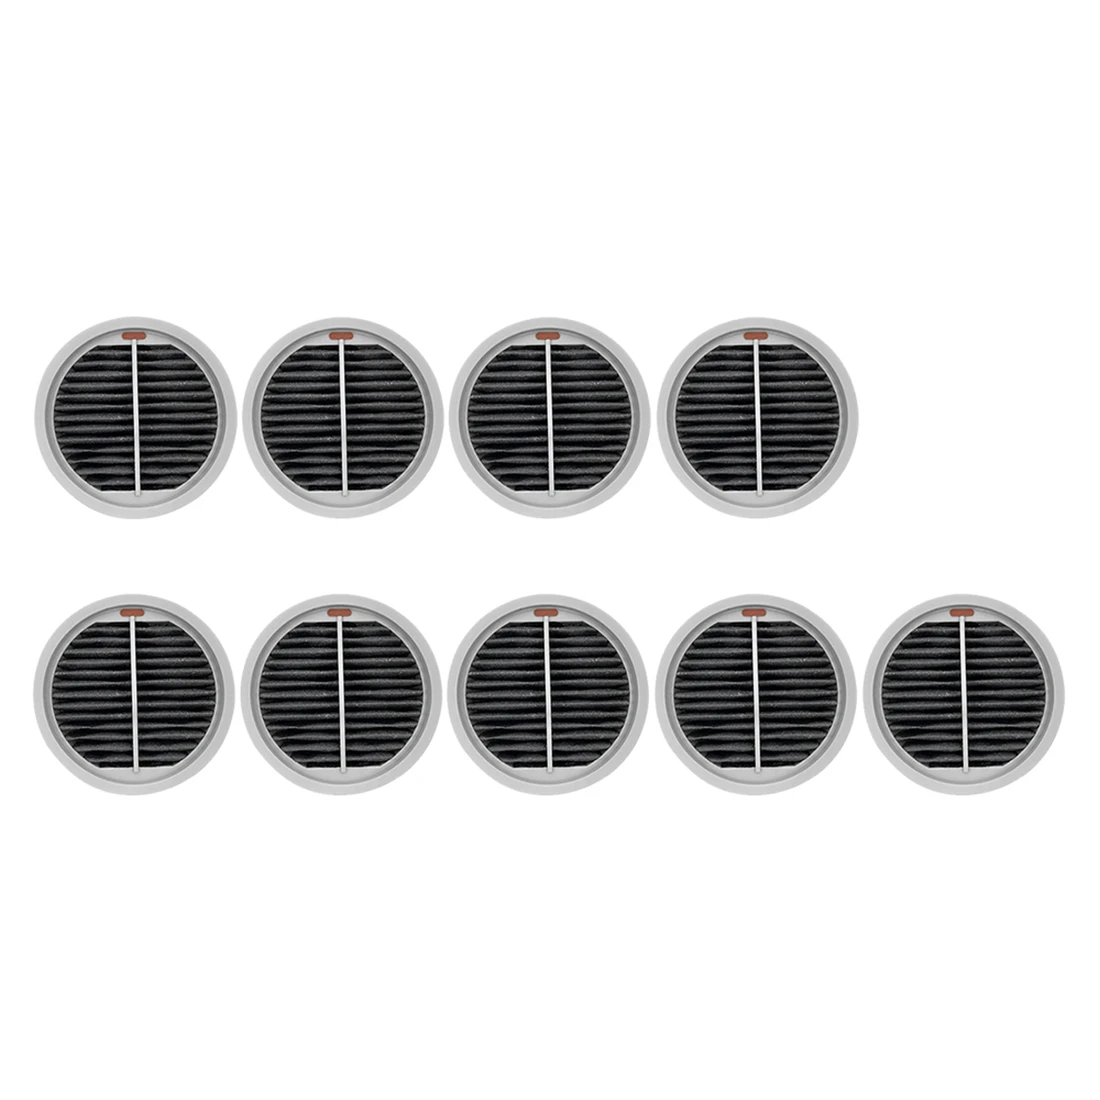 

9PCS HEPA Filter Washable for Xiaomi Roidmi X20 / X30 / X30 / S2 / F8 Storm Pro Wireless Vacuum Cleaner